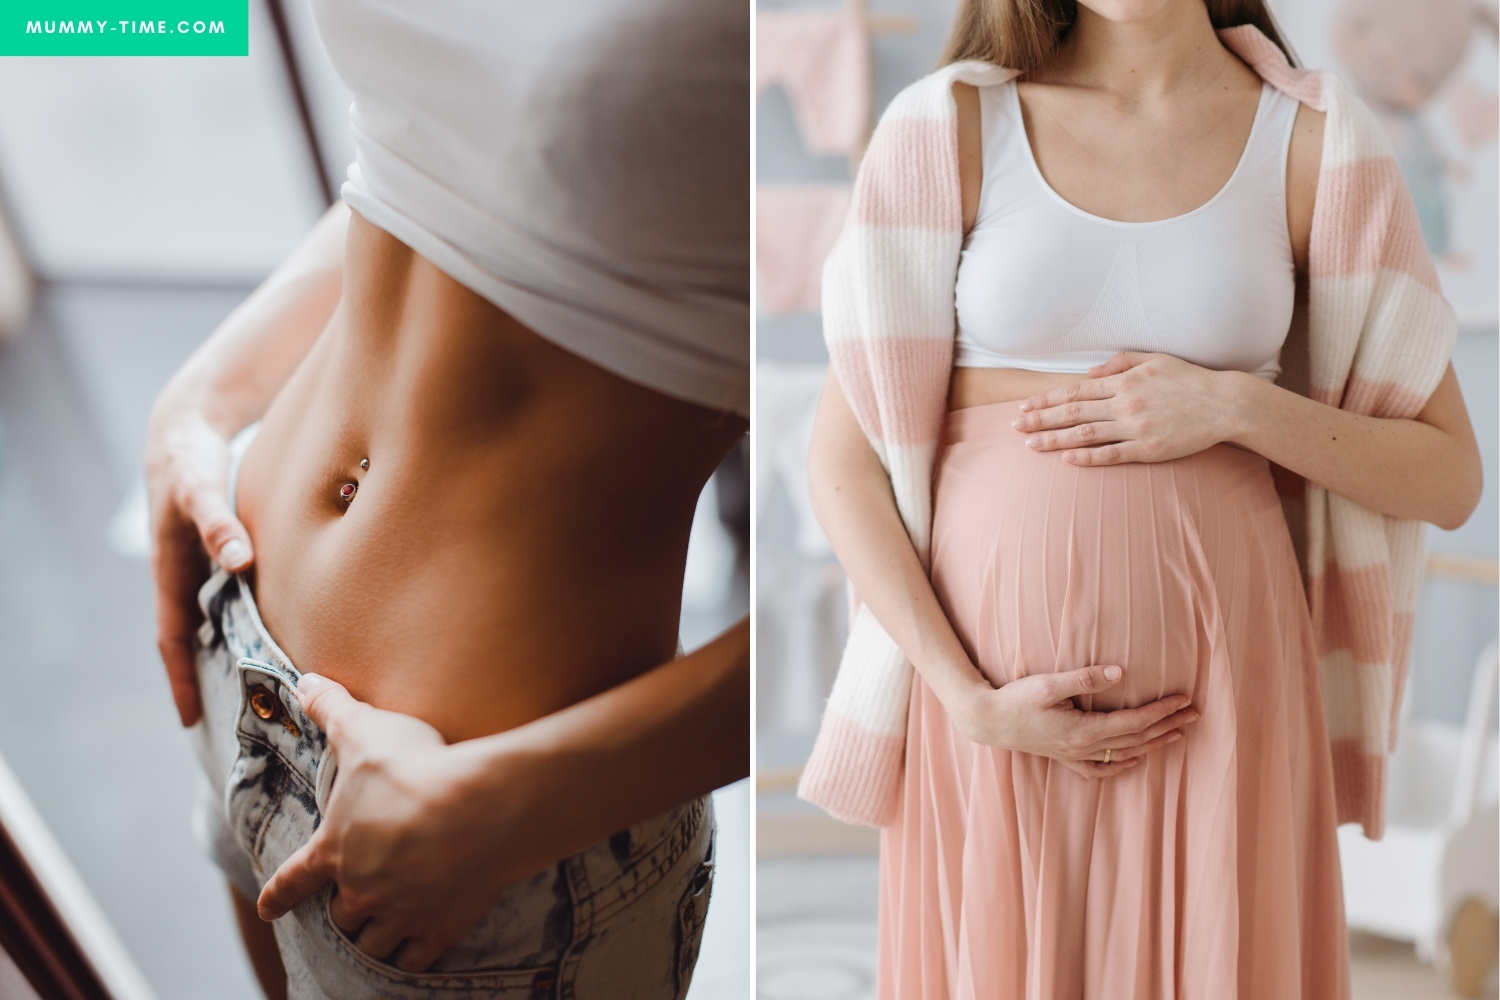 Can You Have A Baby After A Tummy Tuck